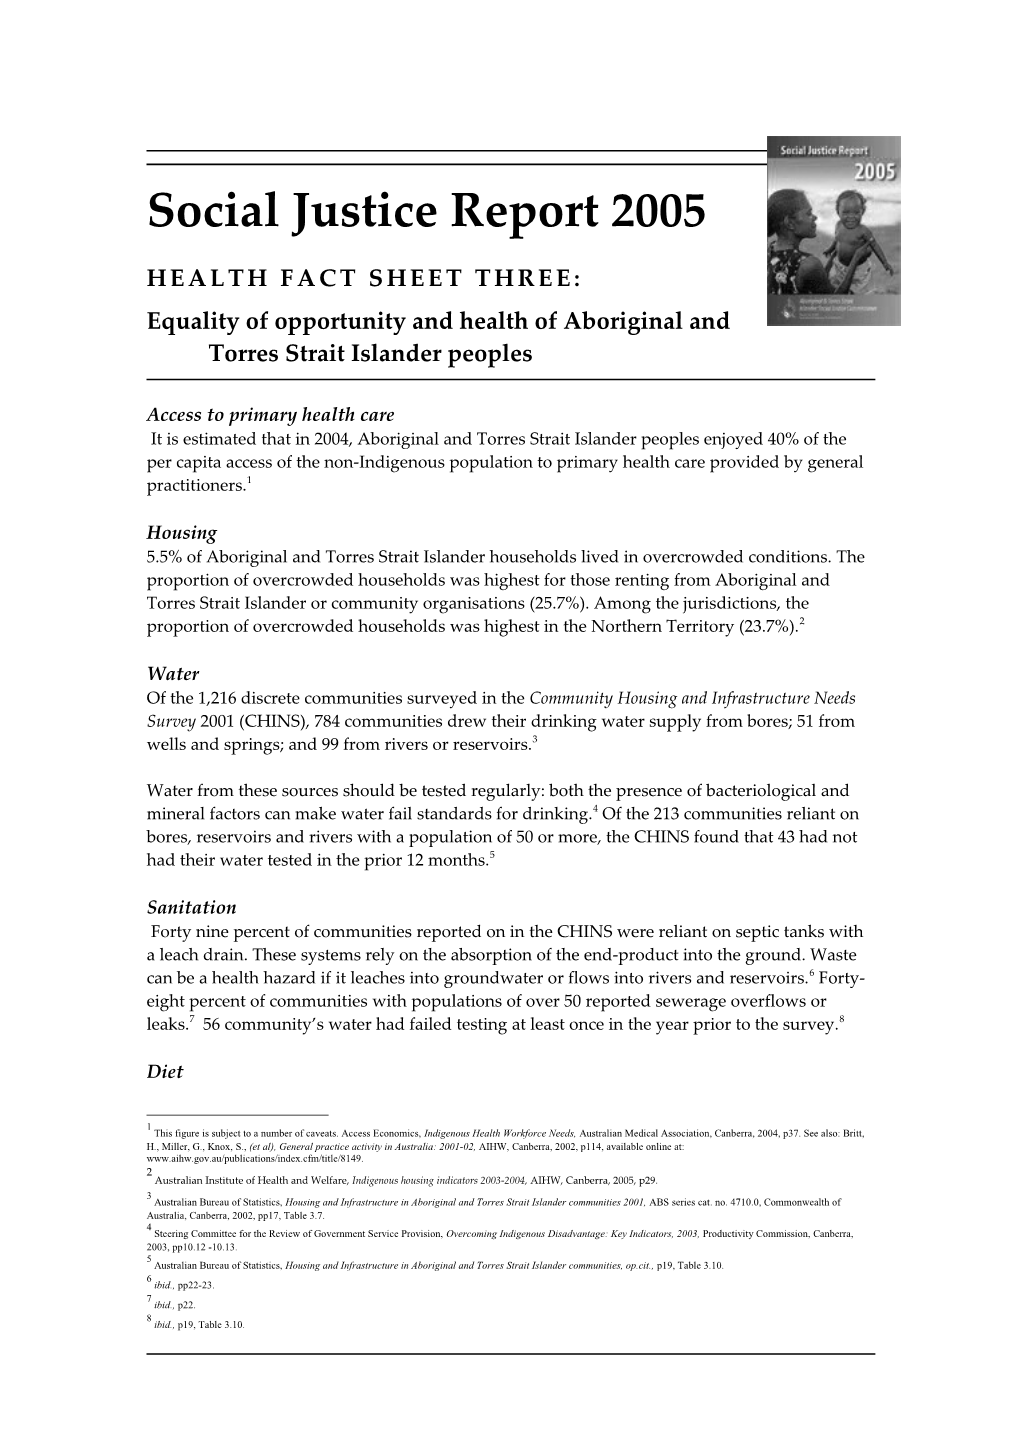 Social Justice Report 2004Summary Sheet One